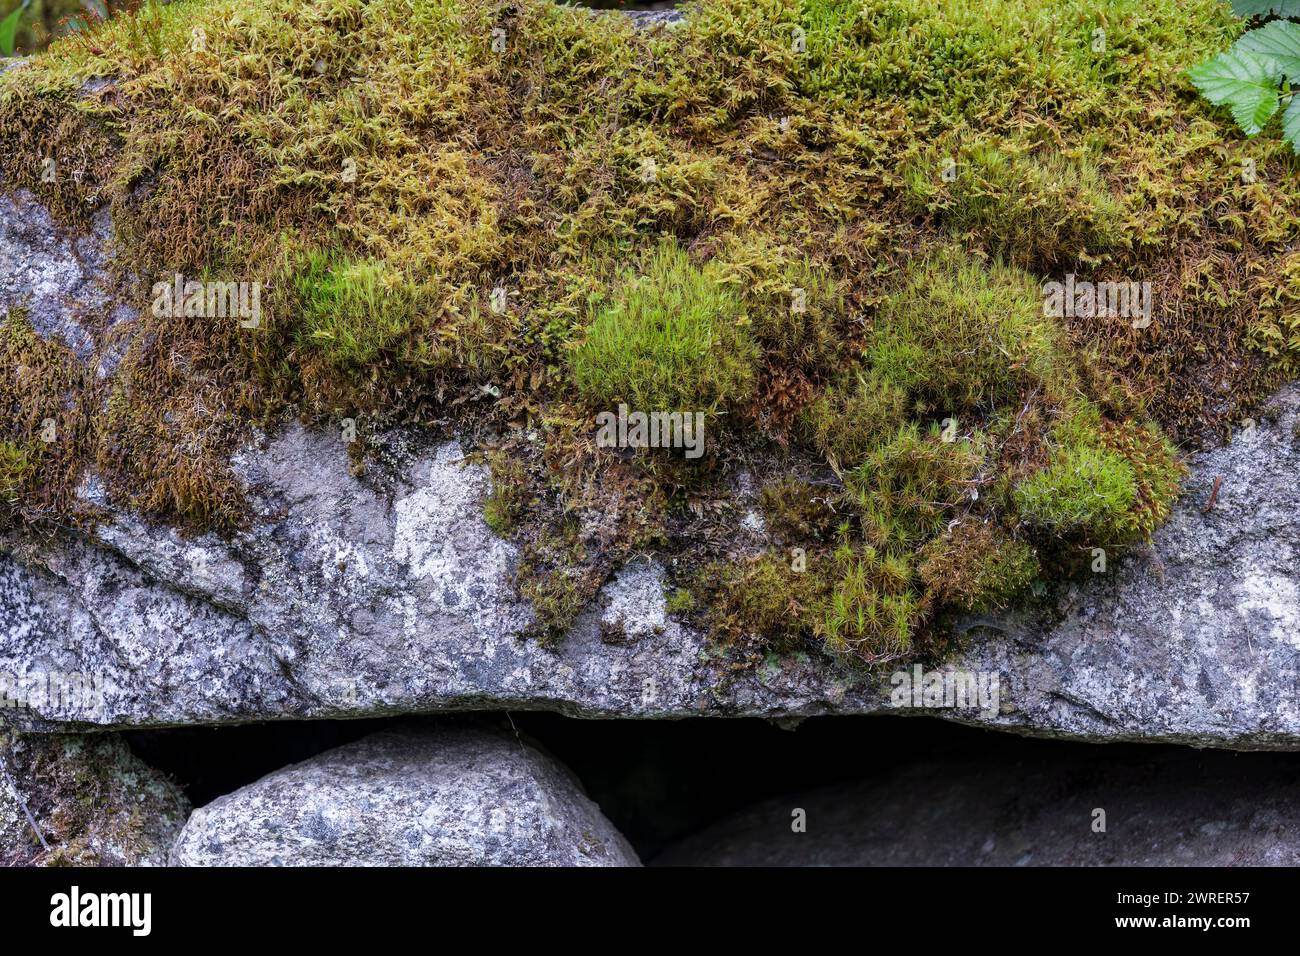 Granite boulder covered in various types of moss. Stock Photo